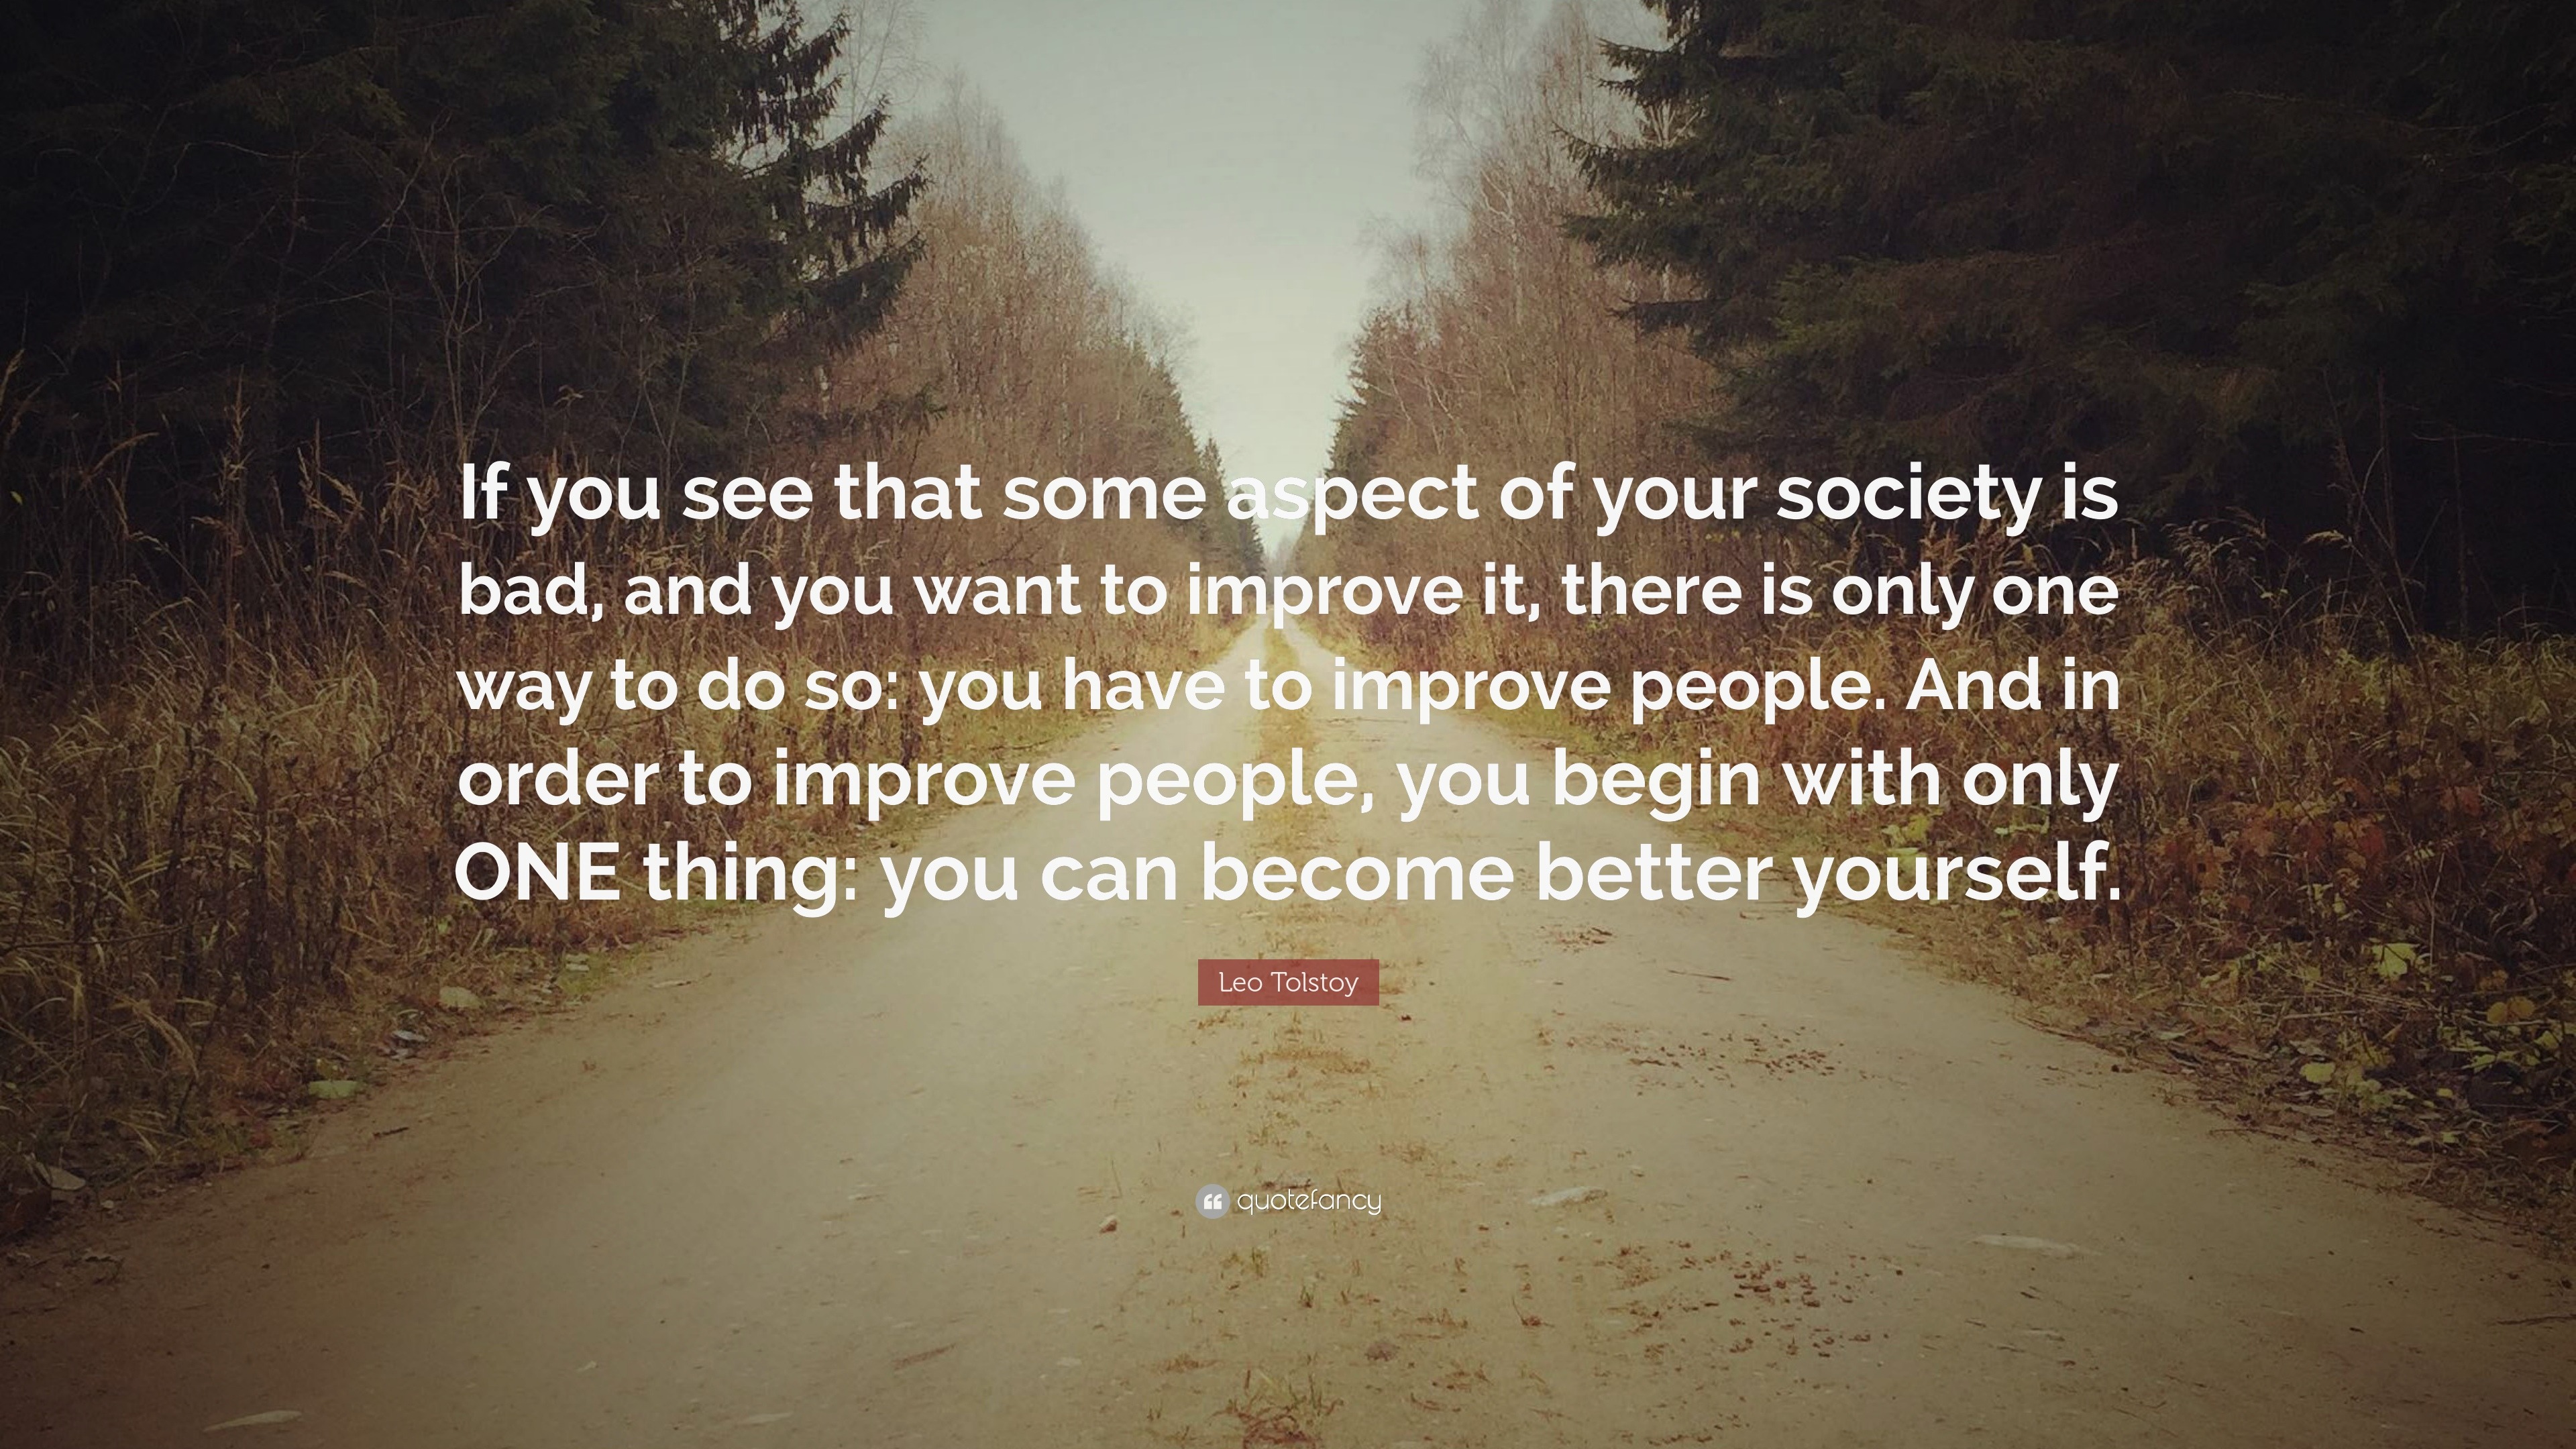 Leo Tolstoy Quote: “If you see that some aspect of your society is bad ...